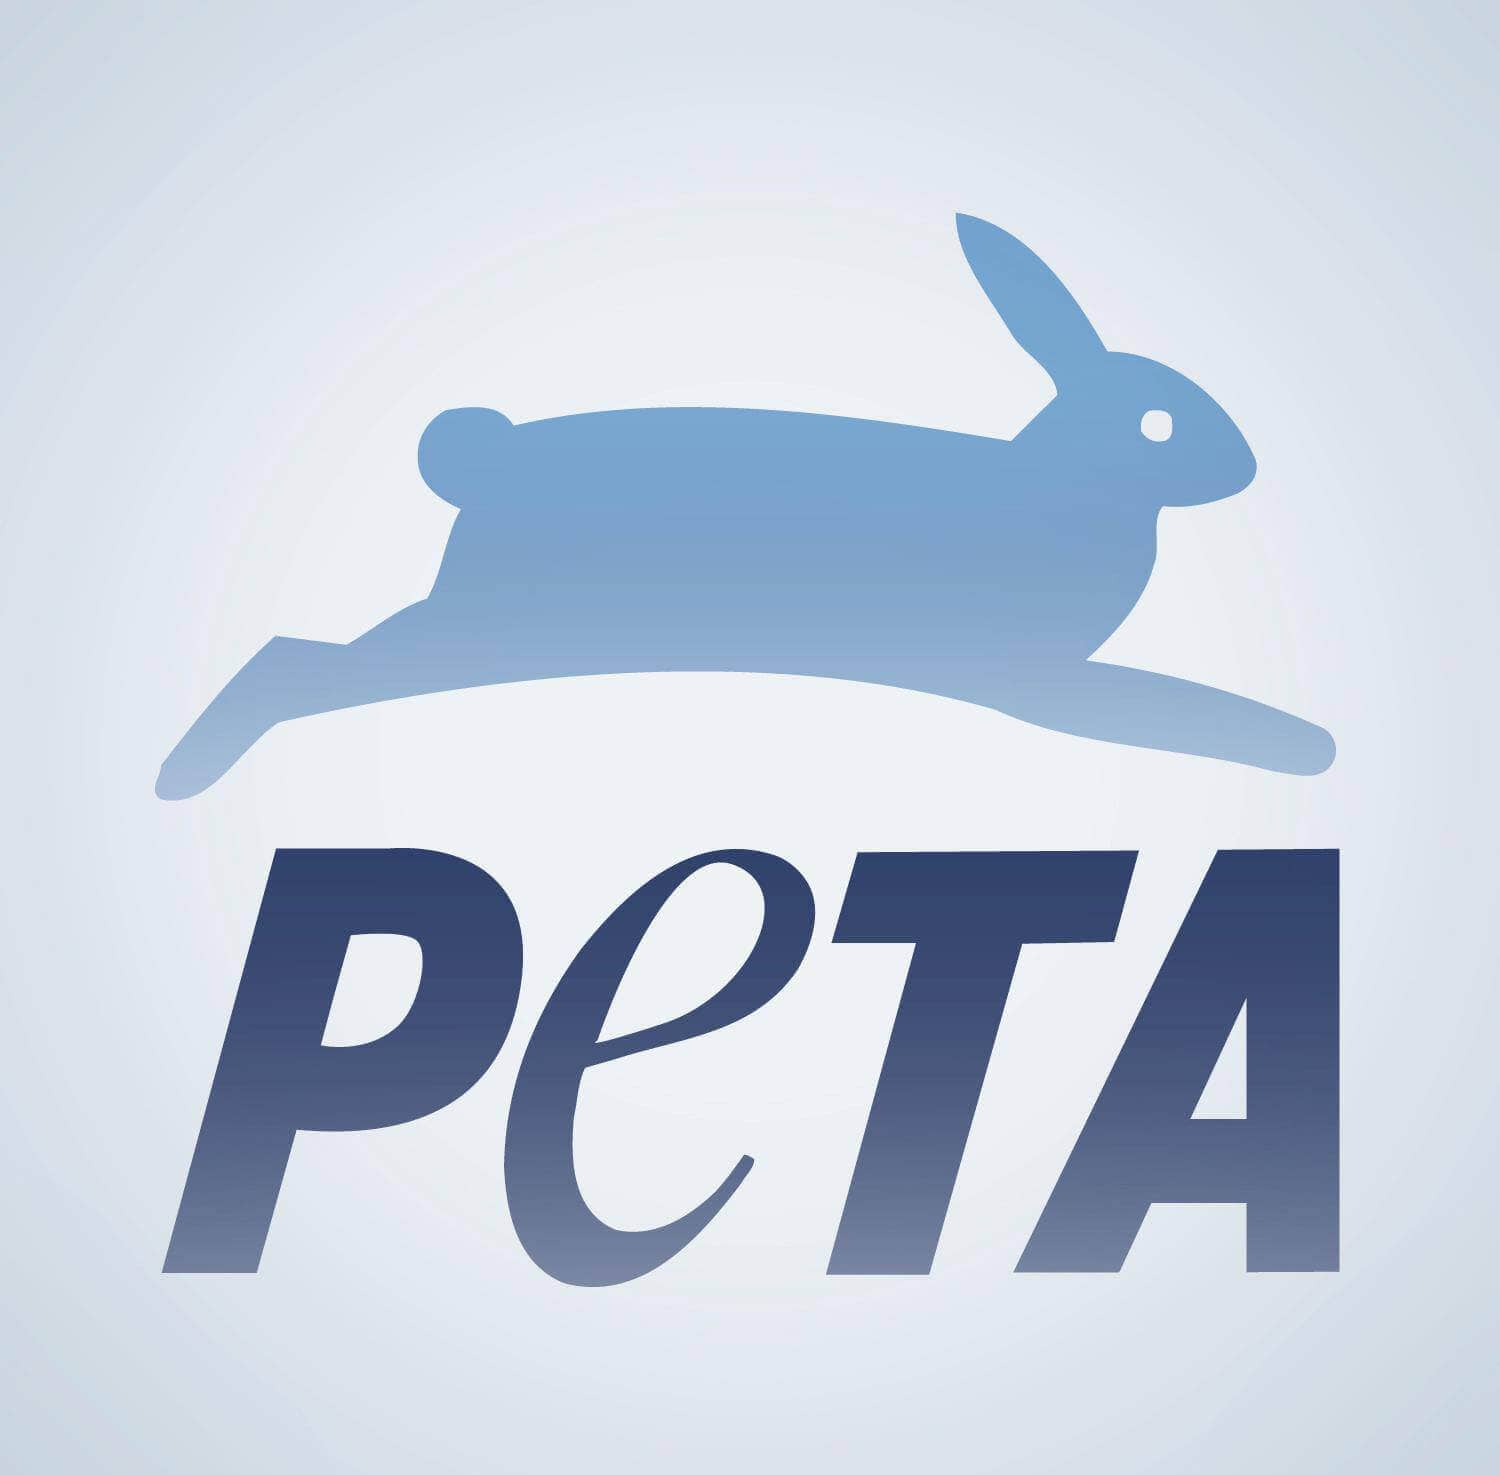 PETA cows milk sign supremacy Twitter animal rights group #DitchDairy vegan